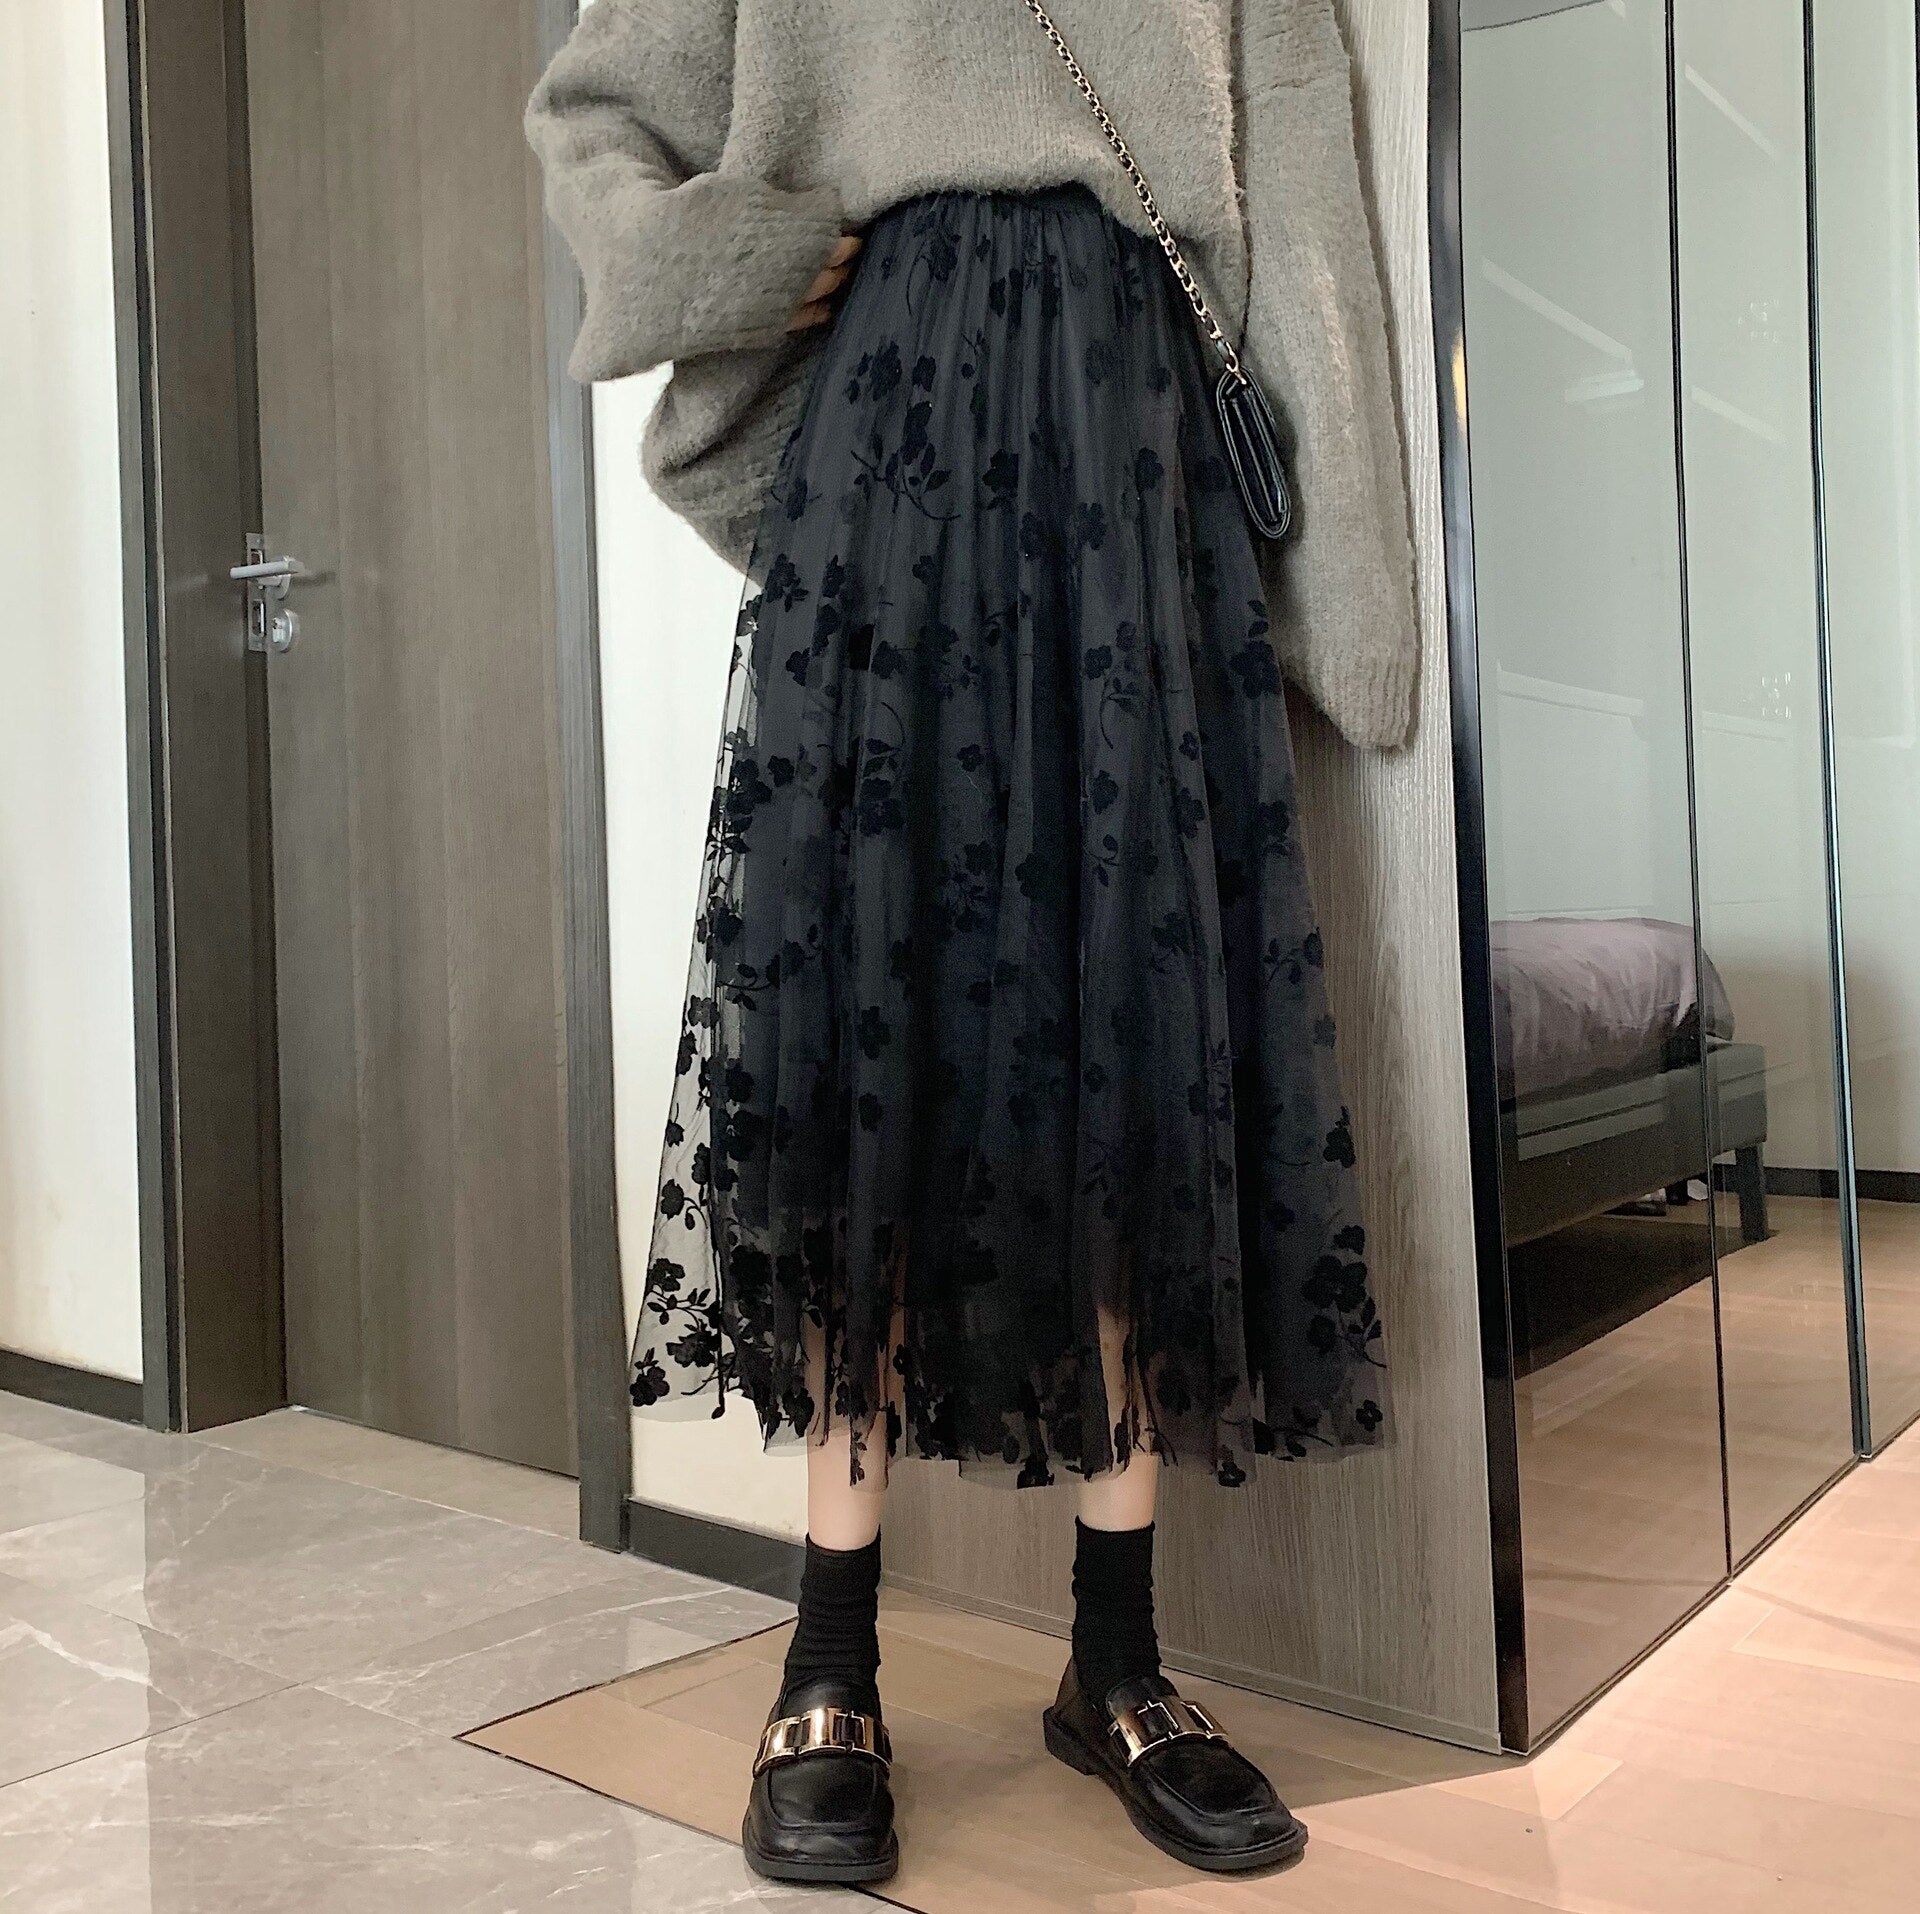 Neophil 2021 Summer Women Tulle Mesh Midi Skirts 3 Layers Floral Puffy Pleated High Waist Casual Fashion Skirt Saias Jupe S21305